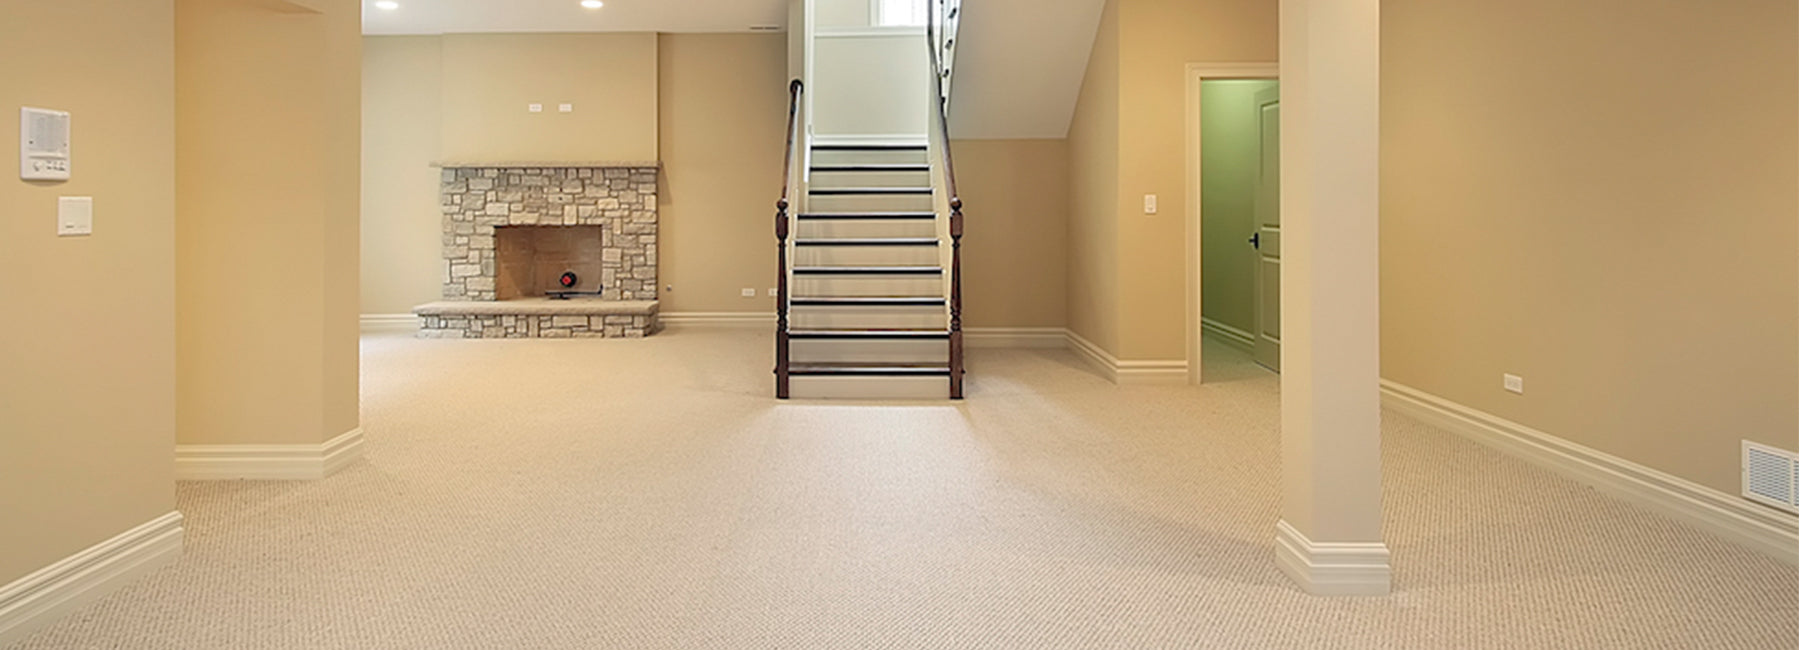 5 Steps to Finishing the Basement